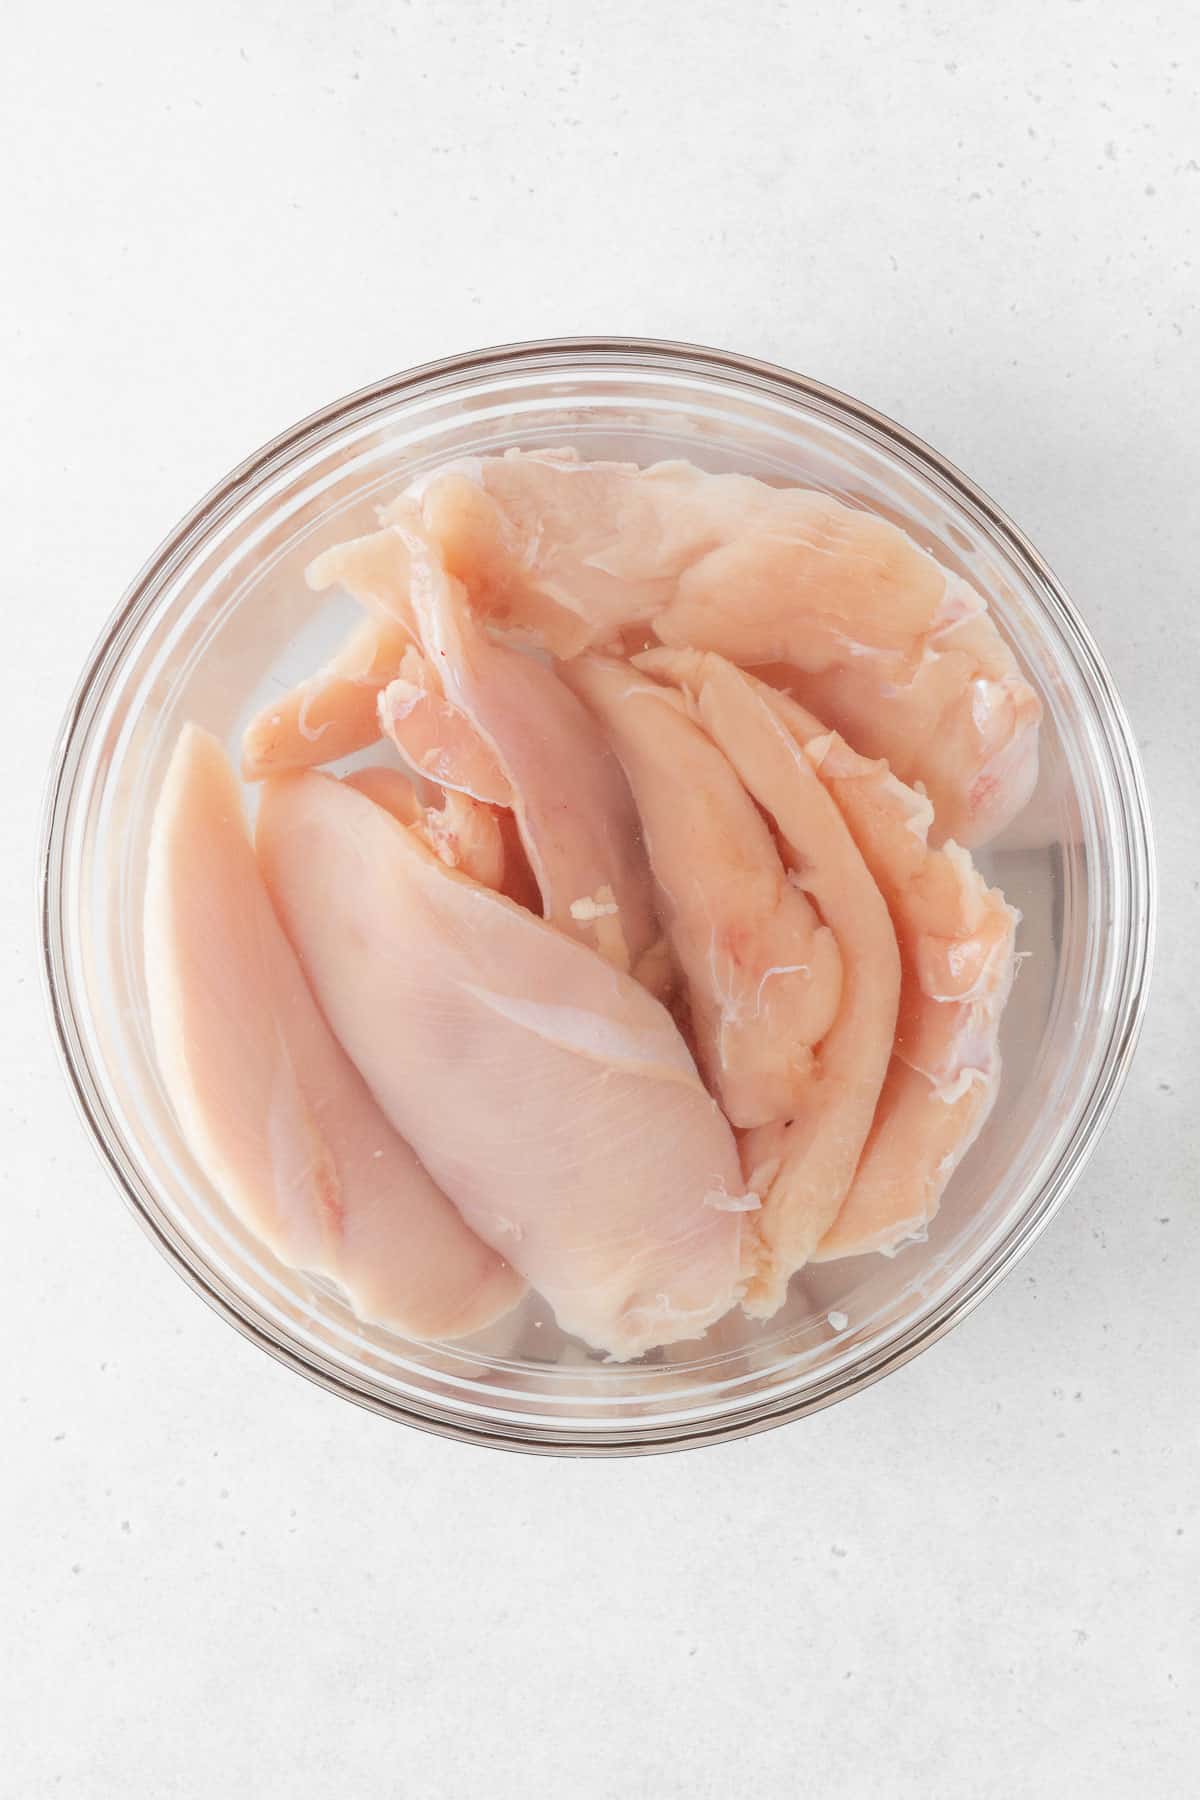 brining the chicken breasts in a simple brine of salt, sugar, and water.